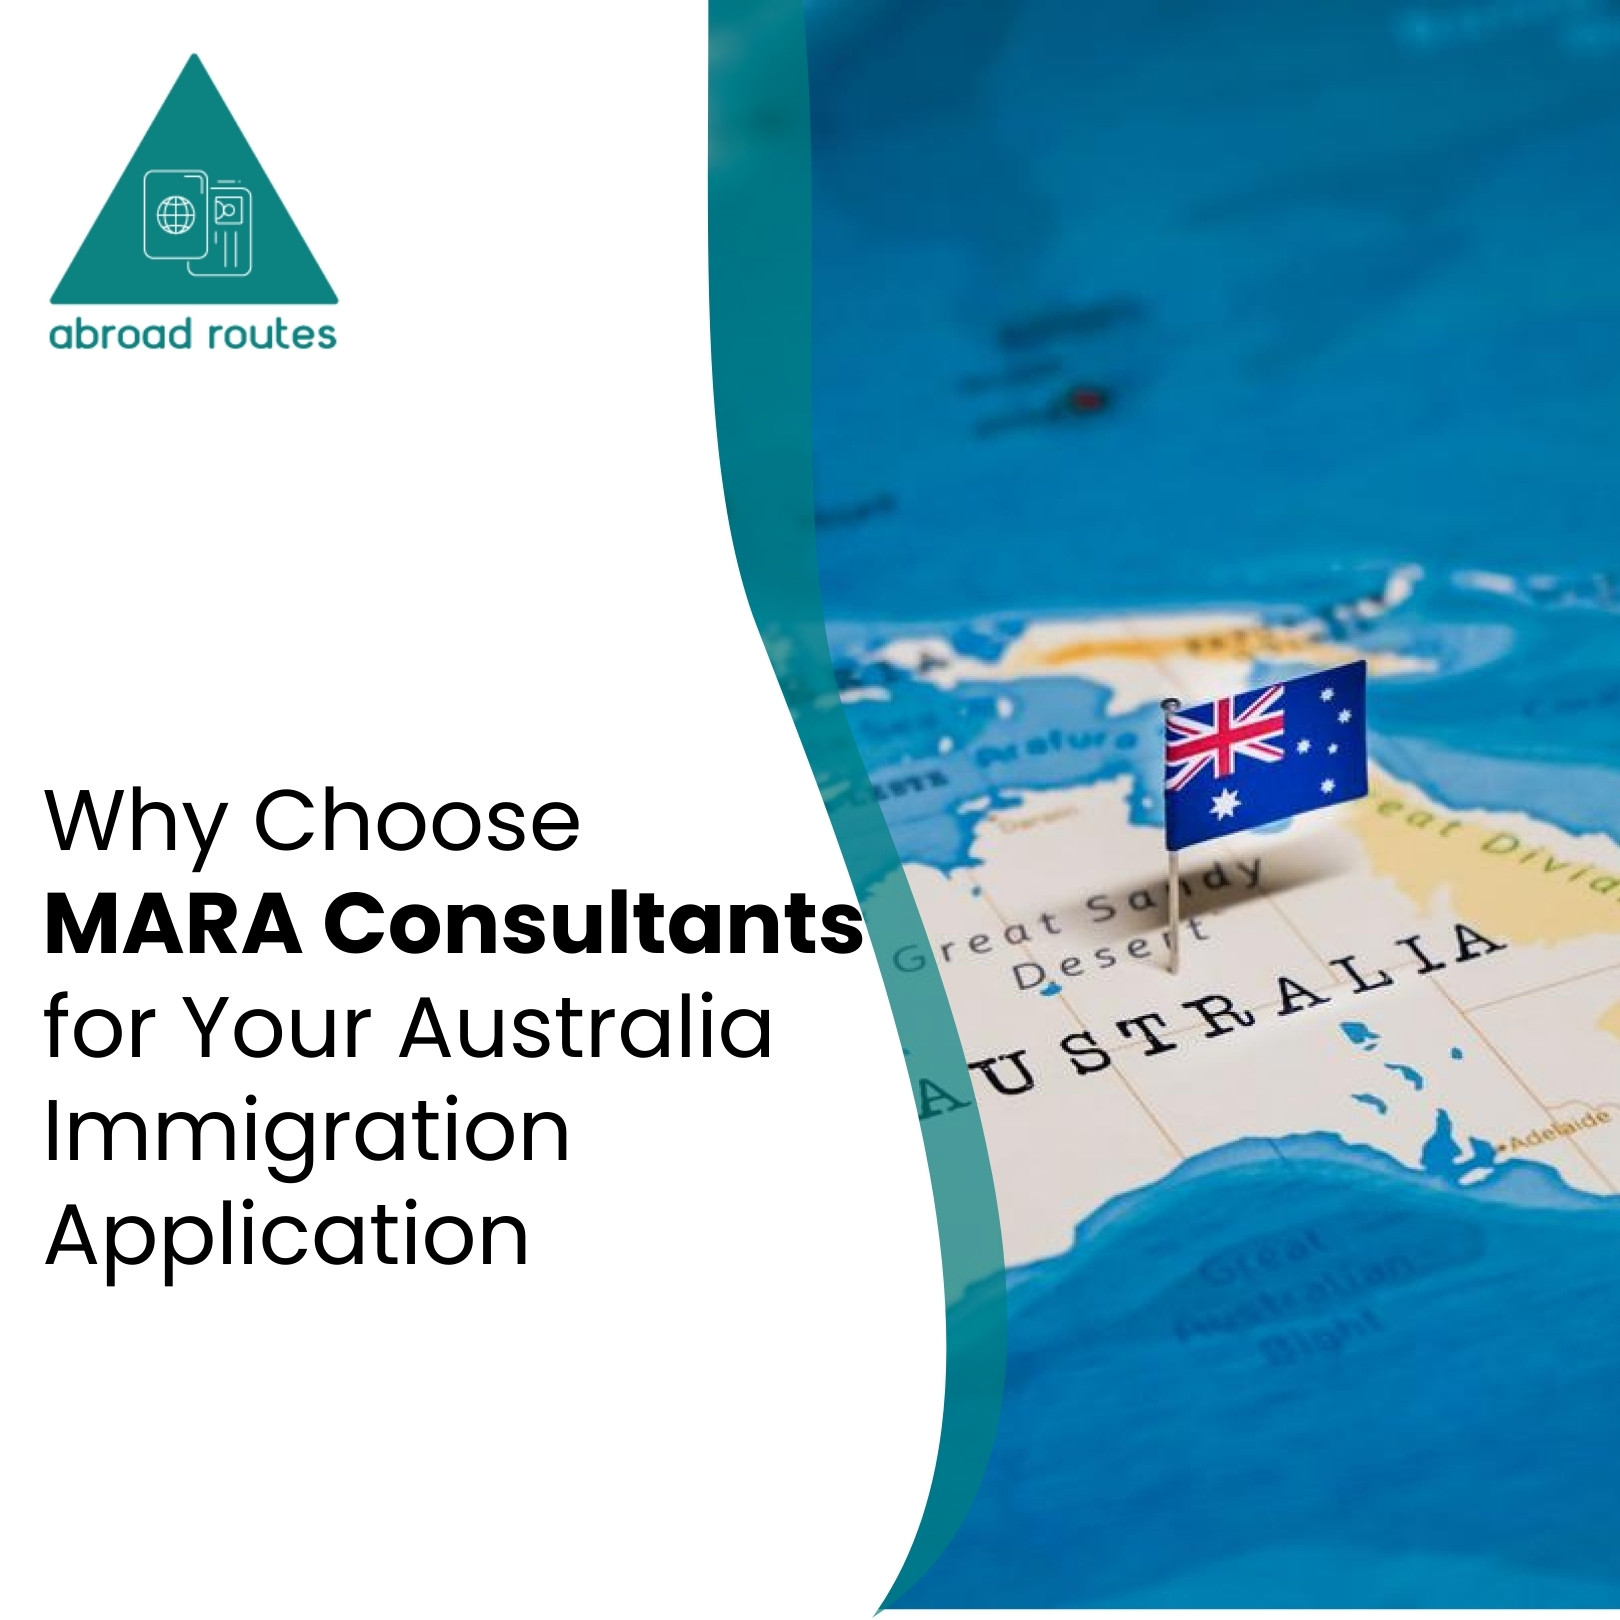 Why Choose MARA Consultants for Your Australia Immigration Application